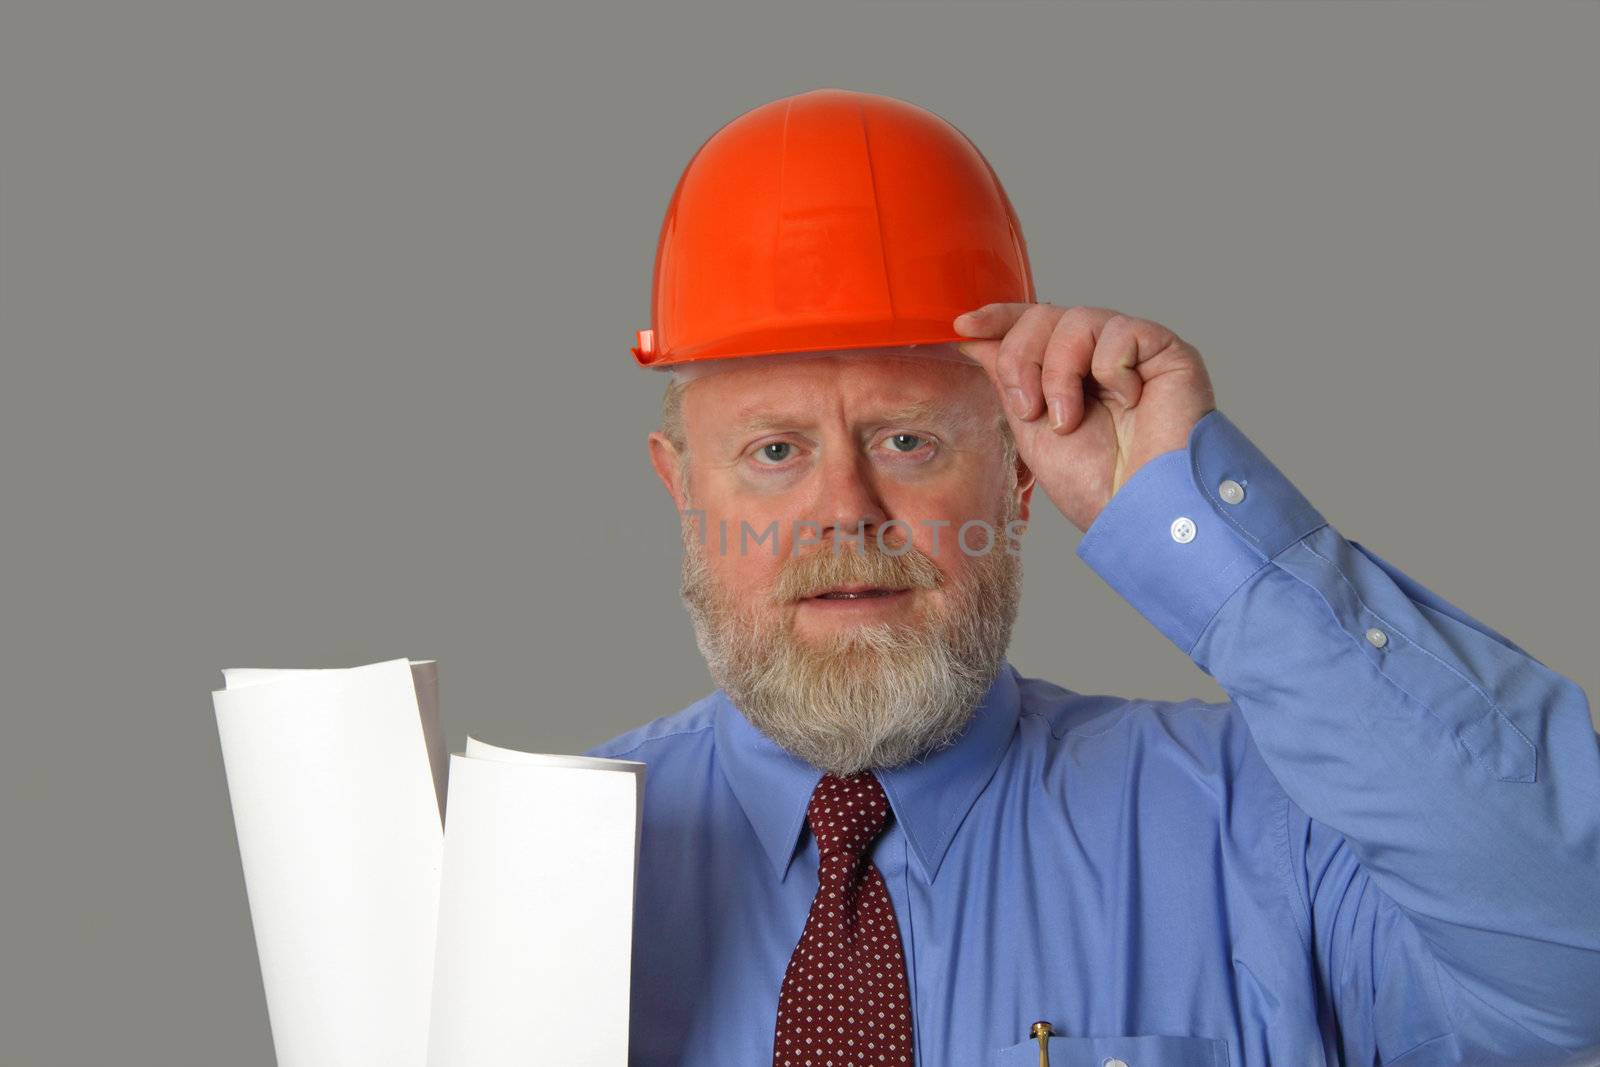 Architect with blueprints and hard hat on grey background
